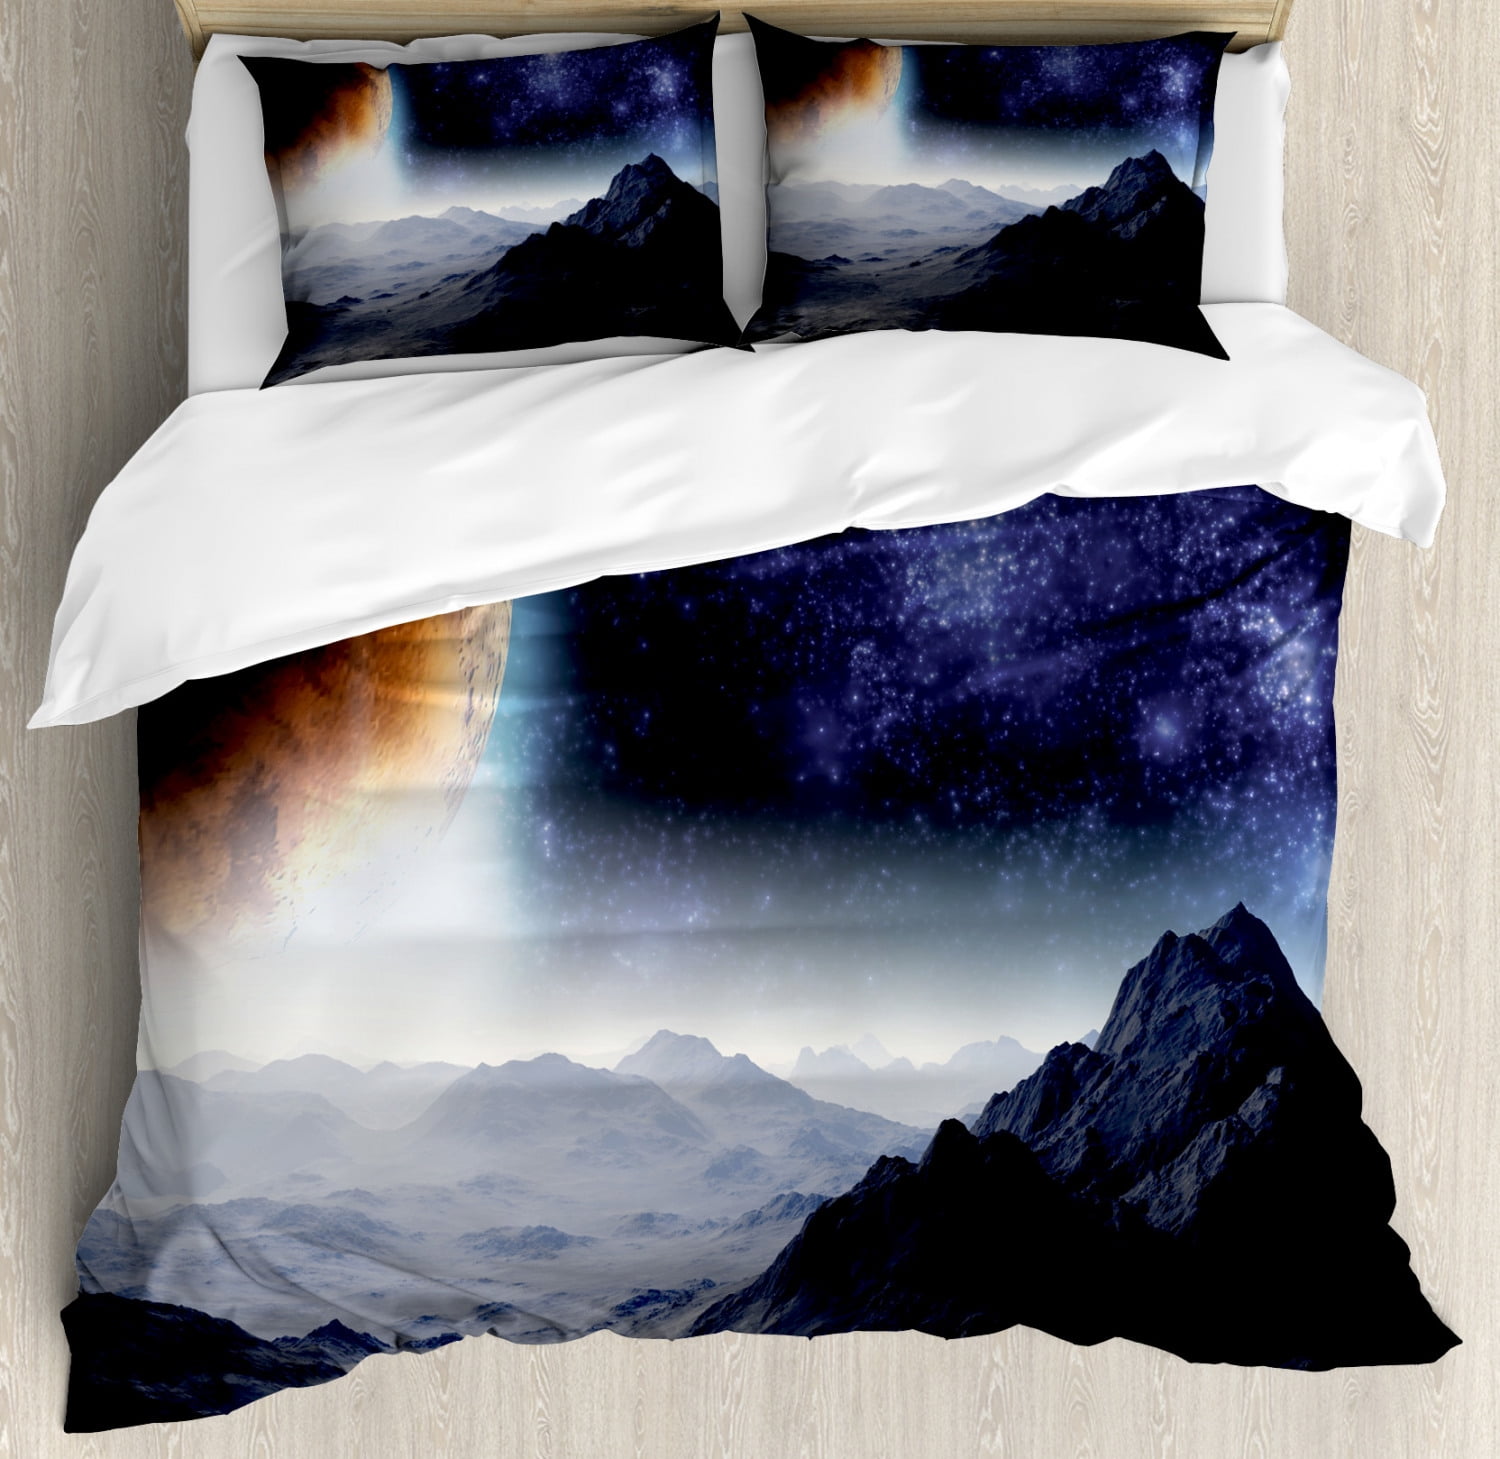 Outer Space Duvet Cover Set King Size, Space Bedding King